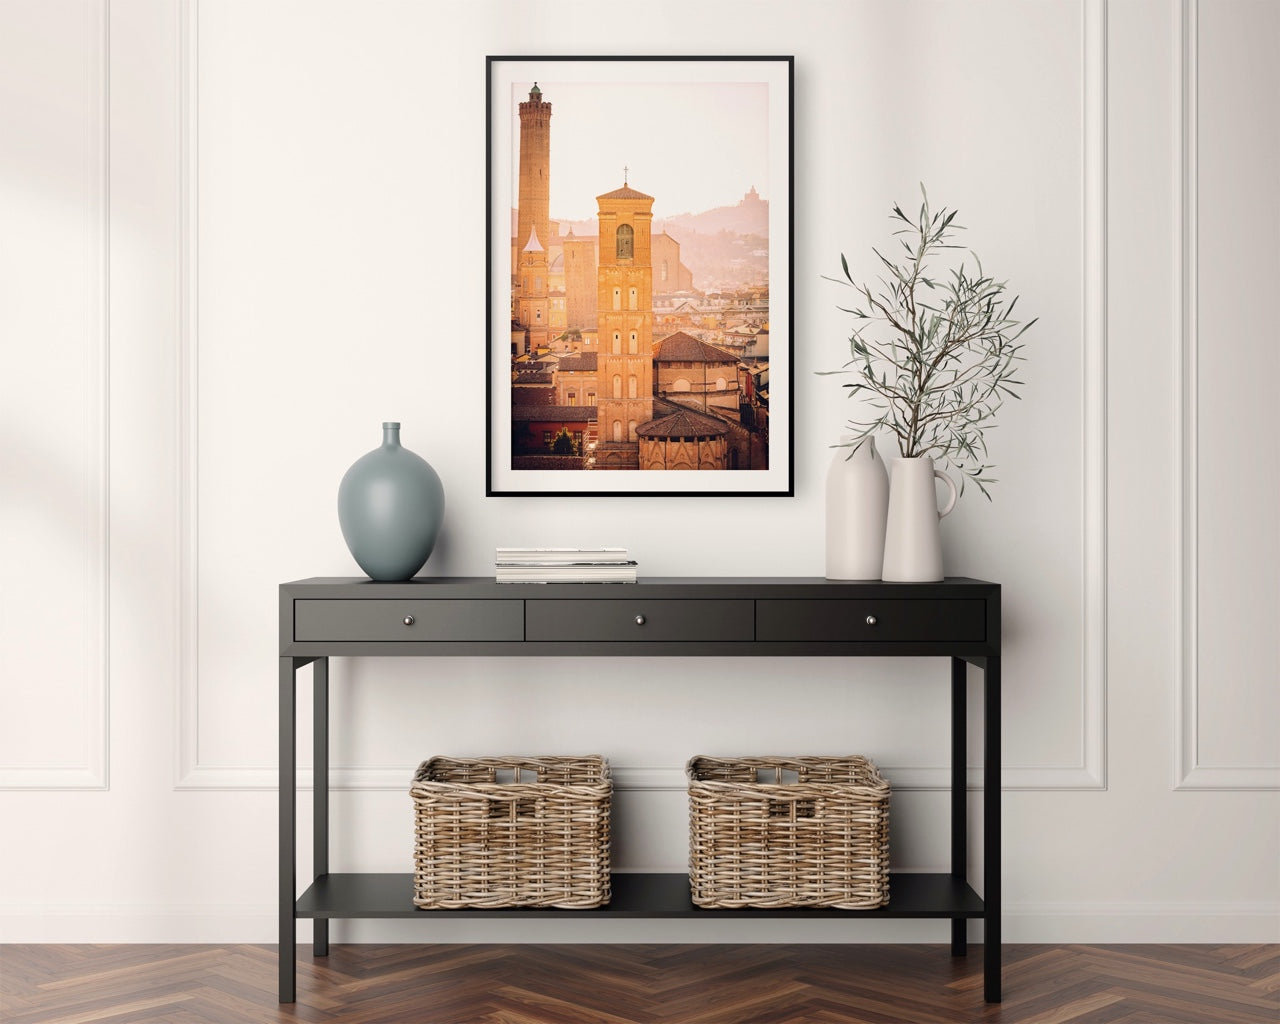 Framed Architecture Wall Art